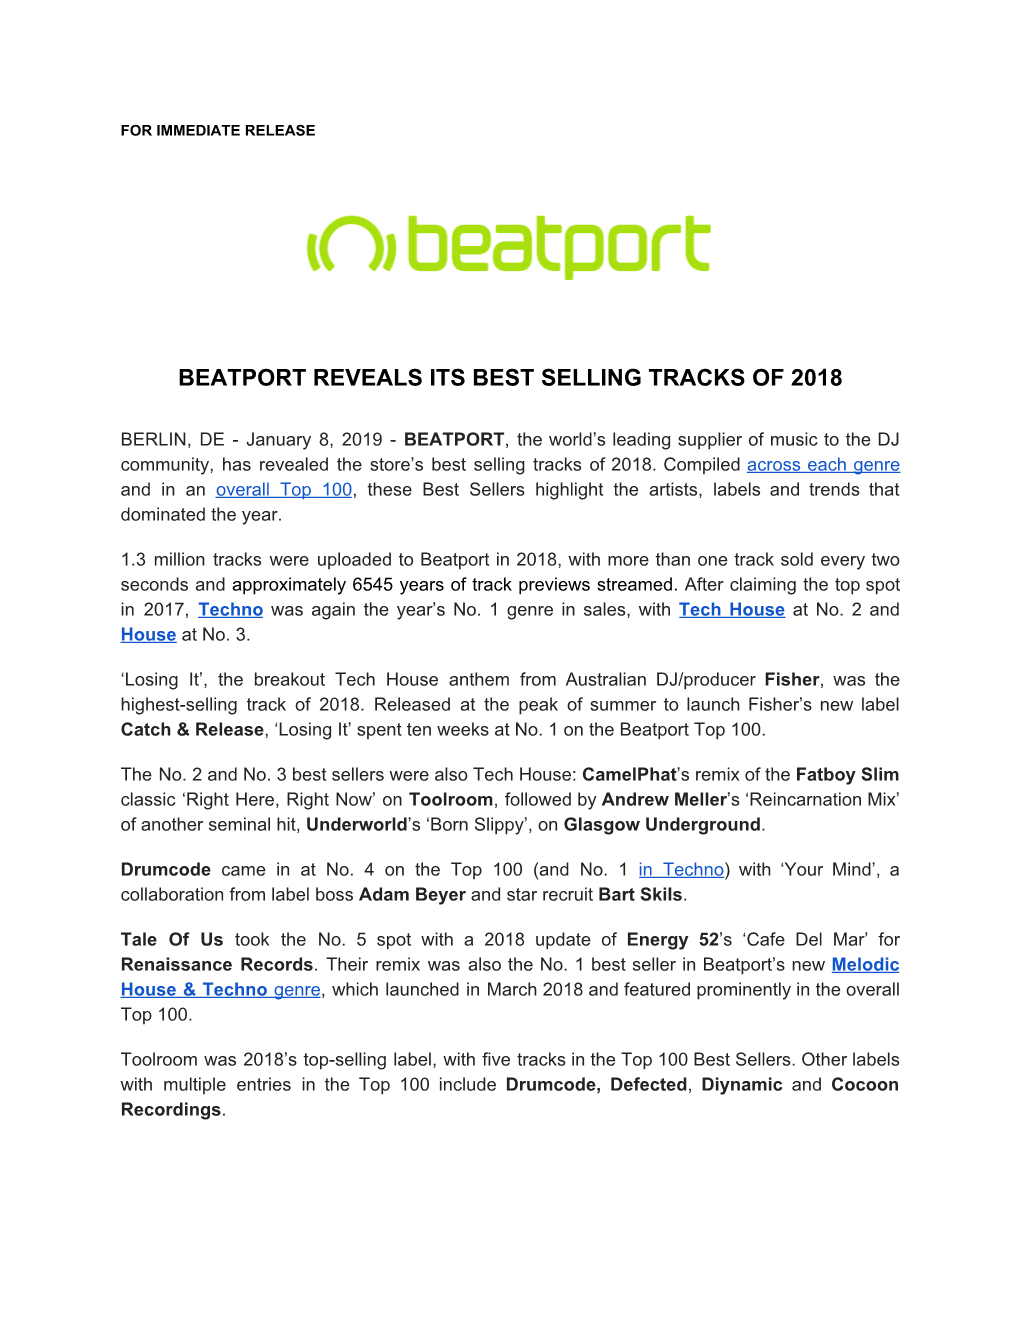 Beatport Reveals Its Best Selling Tracks of 2018